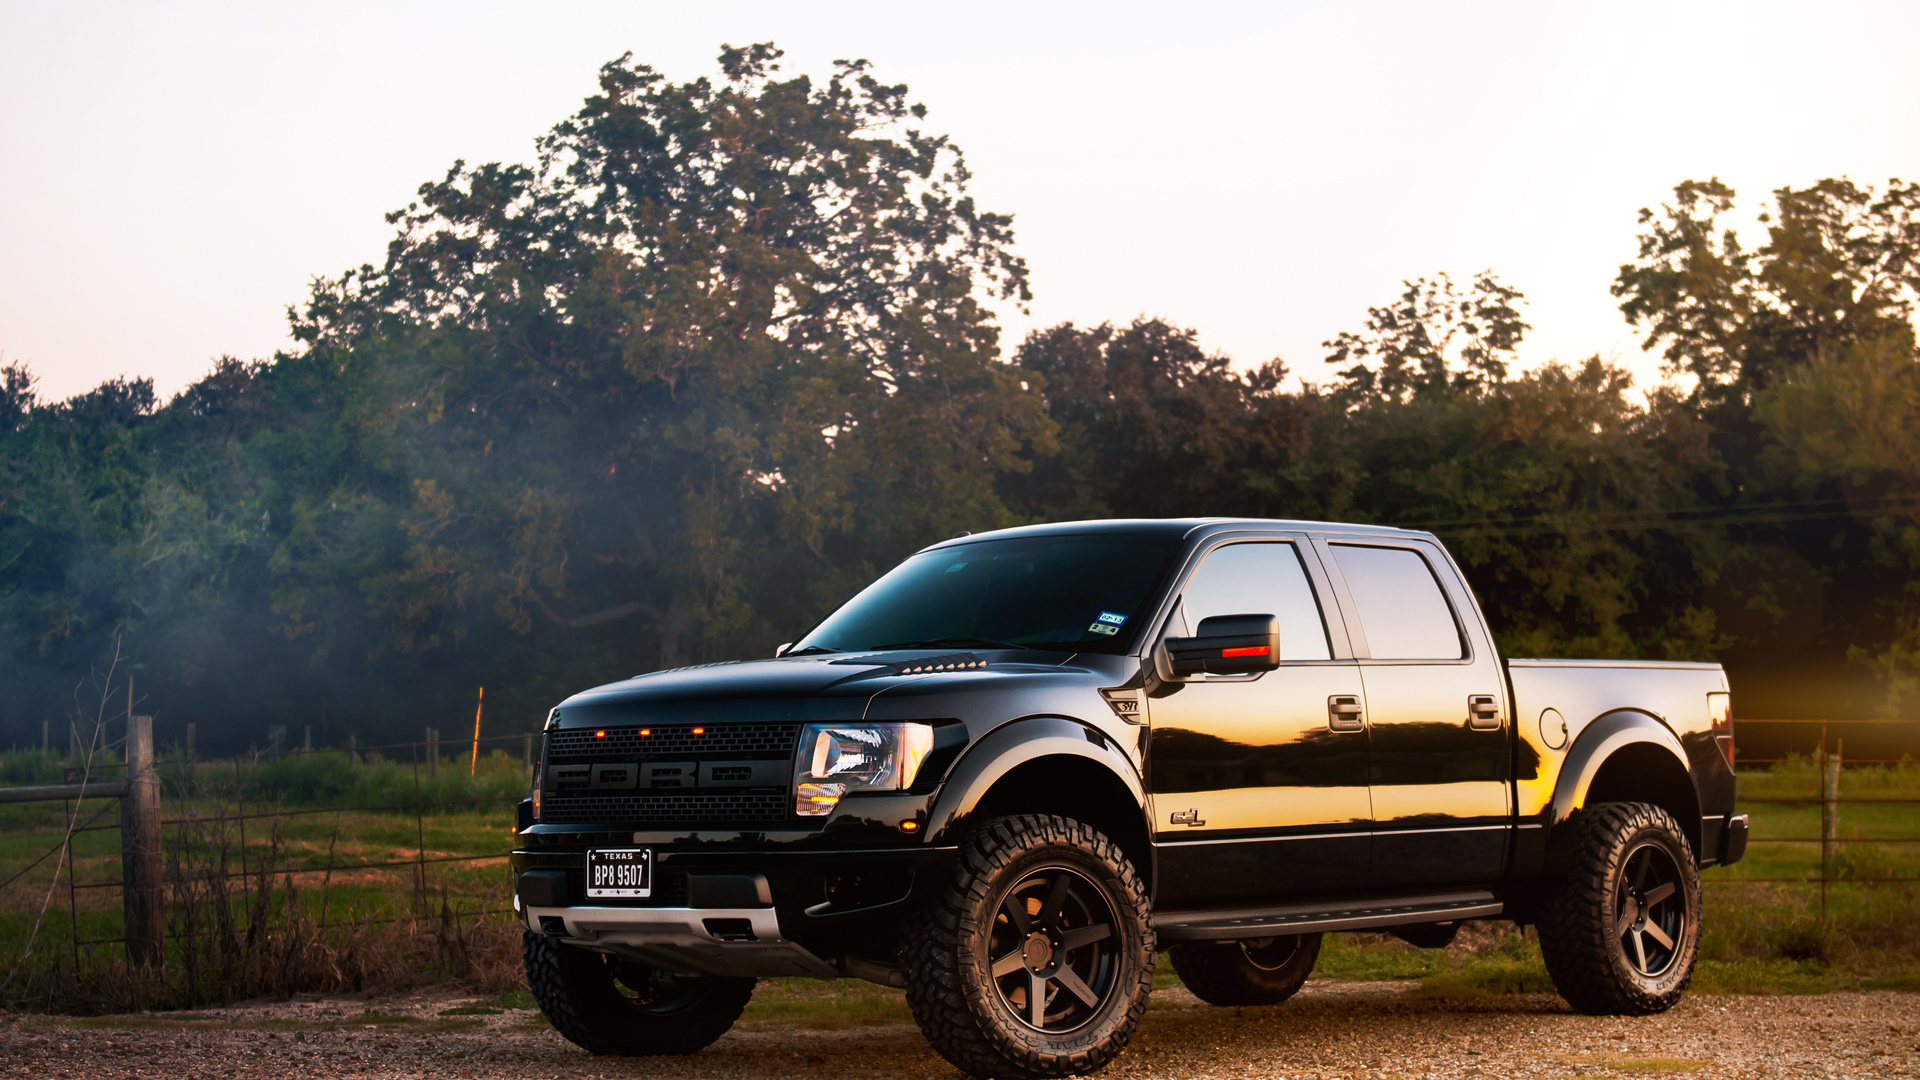 Off Road Ford Pick up Truck Wallpaper   iBackgroundWallpaper 1920x1080